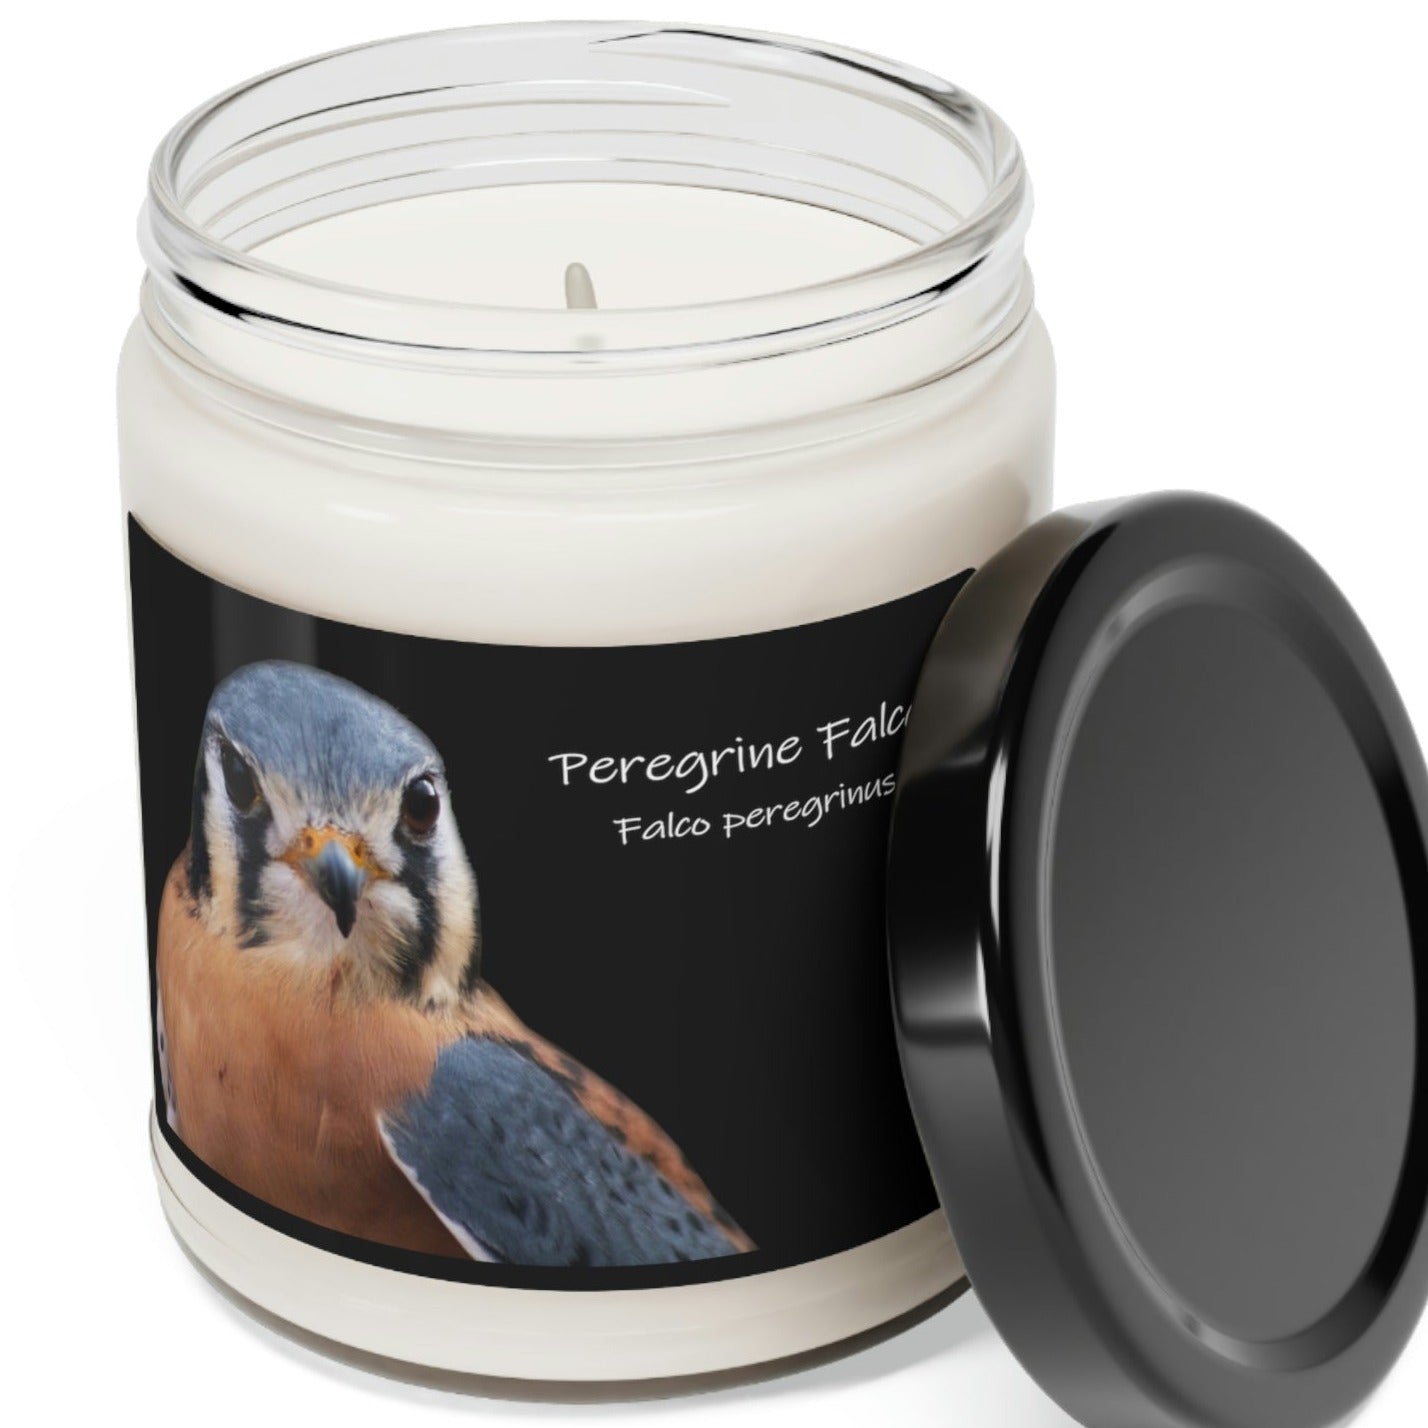 Peregrine Falcon Scented Soy Candle - 9oz